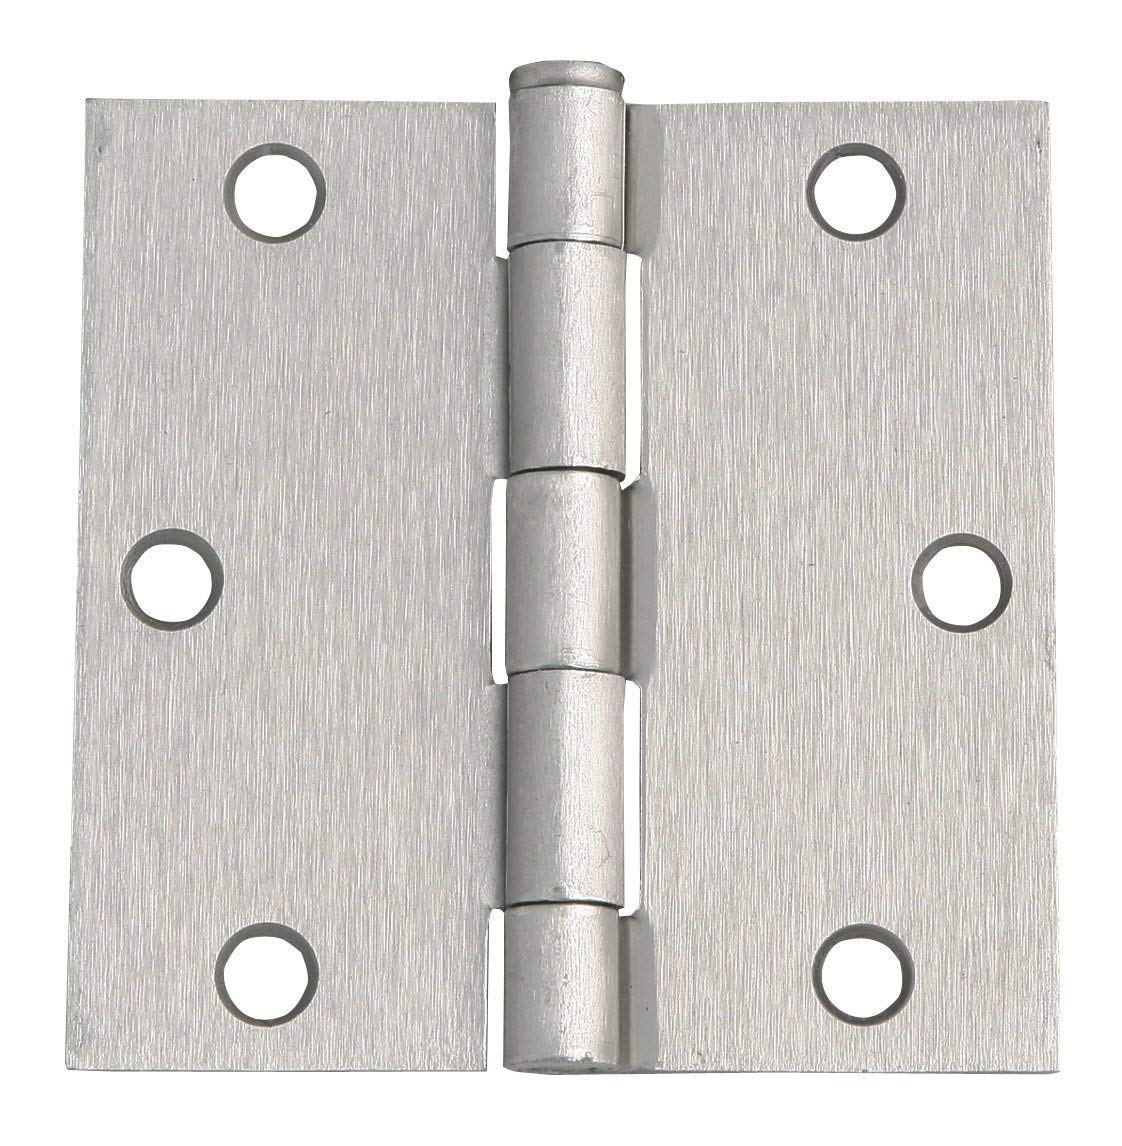 2.5inches-10pcs AnFun Silver Tone Home Furniture Hardware Folding Butt Hinges Door Hinge Mirror Polished Finish Stainless Steel Ball Bearing Hinge 